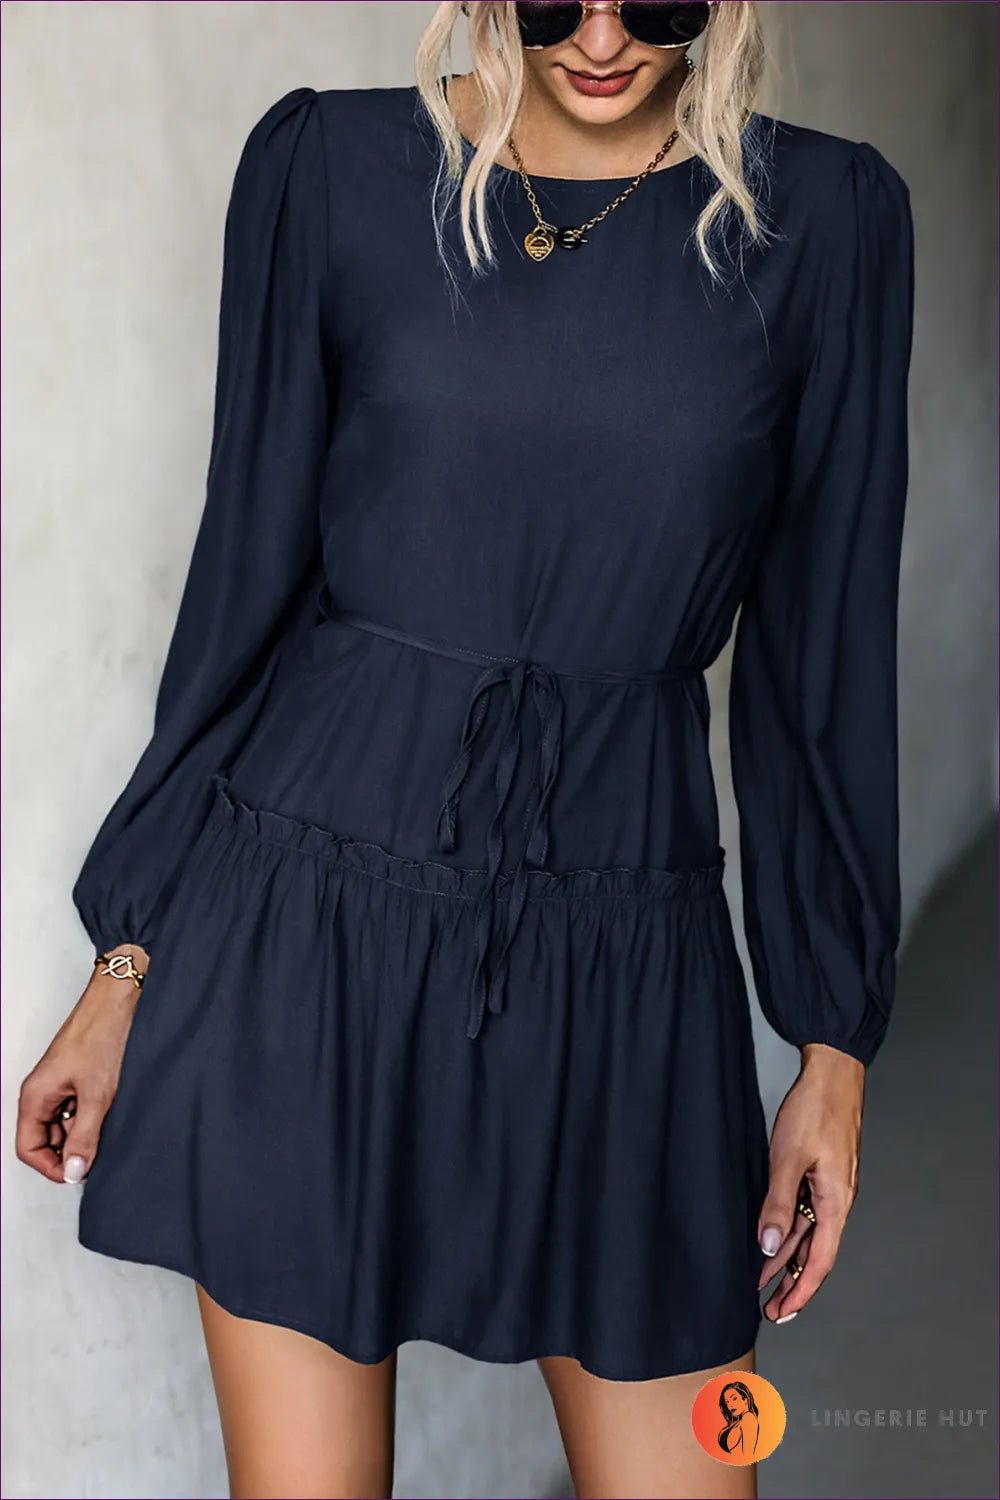 Shine With Confidence And Glamour In Our Stunning Ruffle Detail Long Sleeve Dress. Bold Colors, Feminine